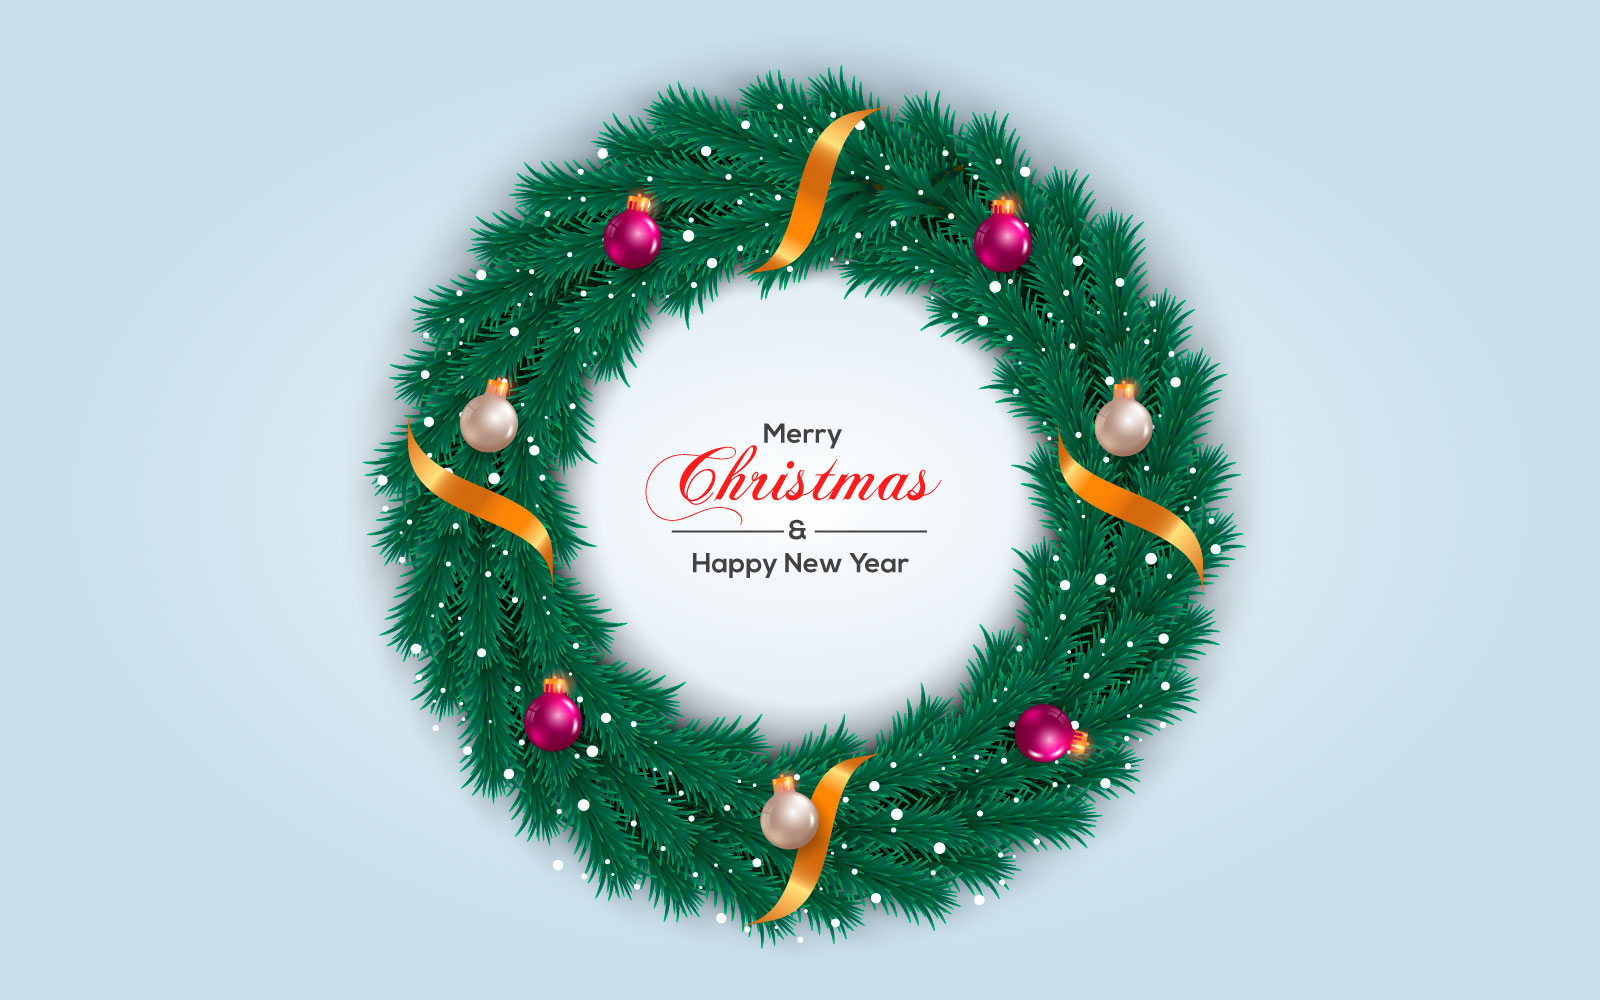 Christmas wreath vector design. merry christmas text in grass wreath element with leave